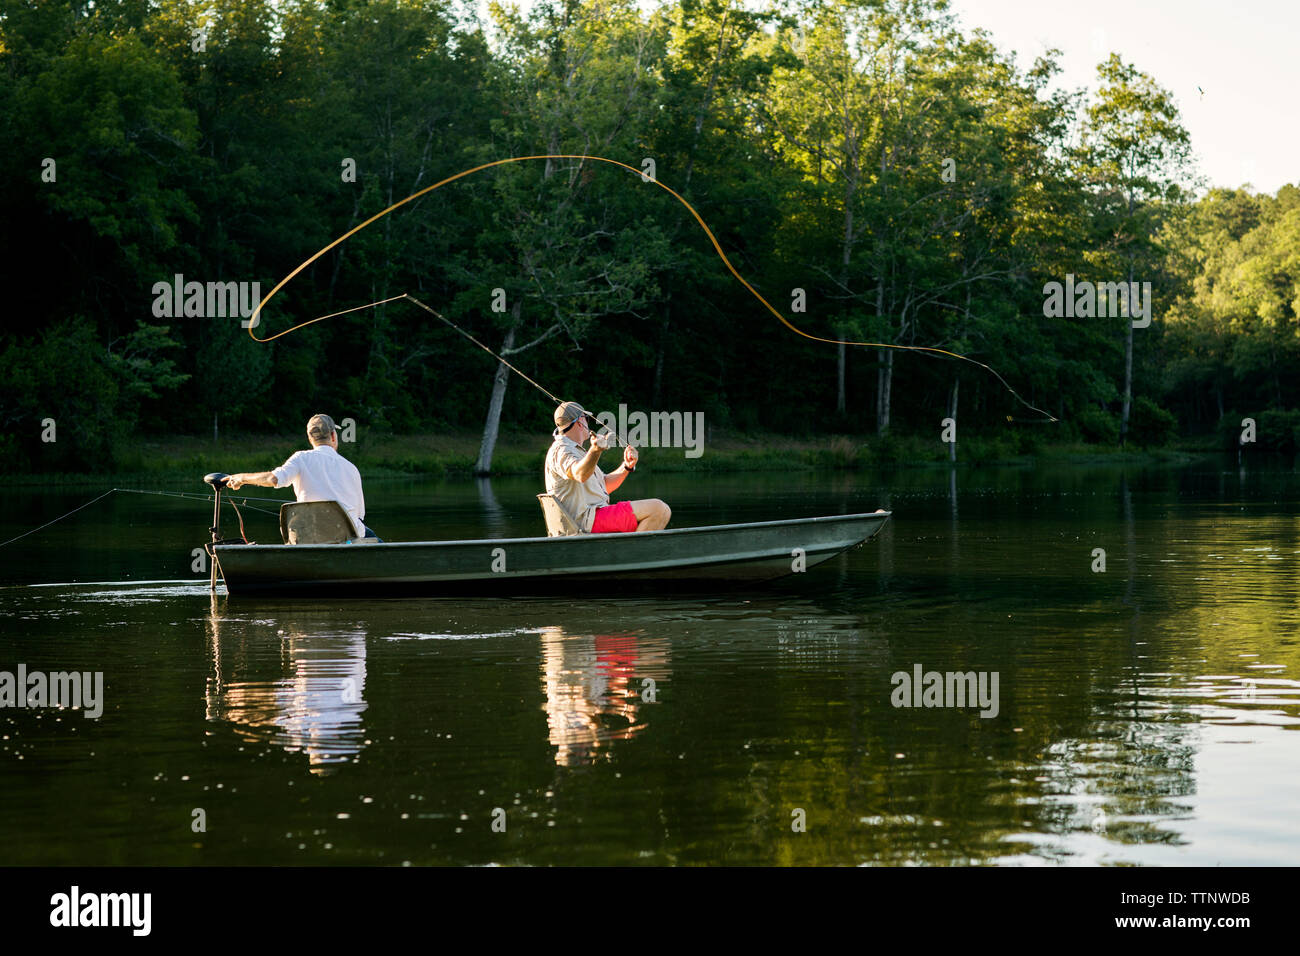 Man casting fishing line in lake with friend sitting in rowboat Stock Photo